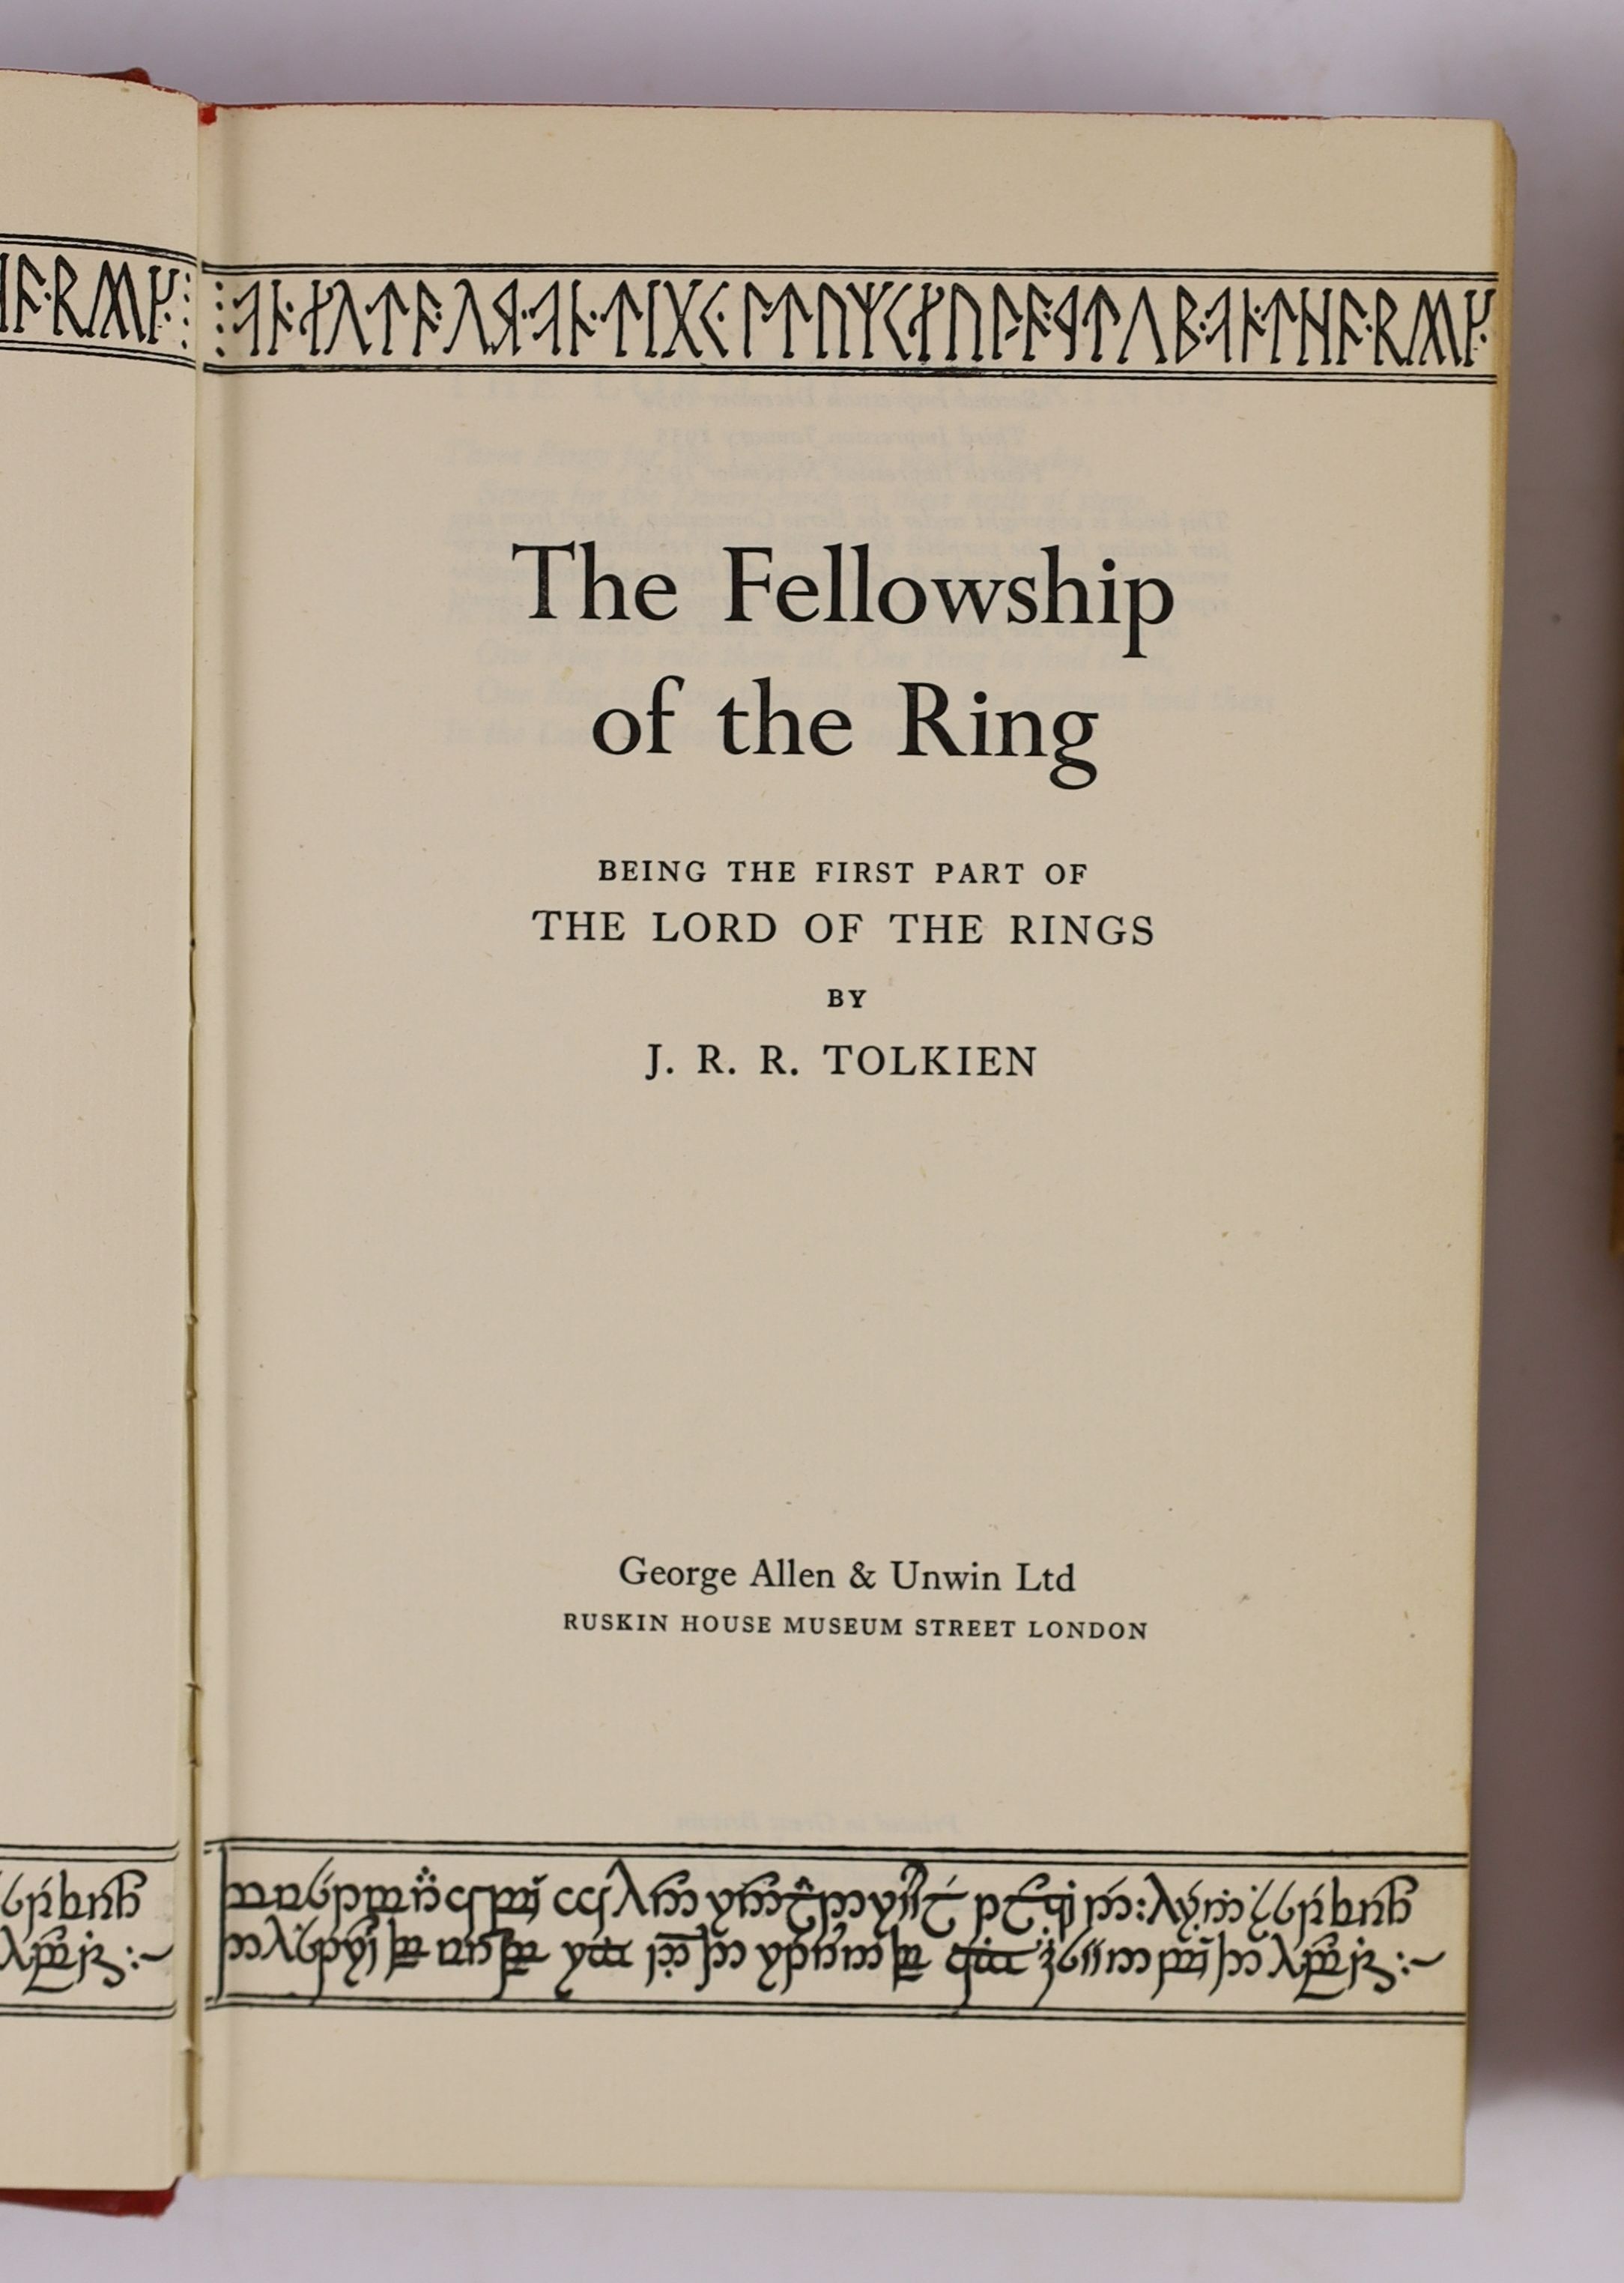 Tolkien, John Ronald Reuel - The Lord of the Rings, 4th impressions of The Fellowship of the Ring, in slightly torn and discoloured d/j, and The Two Towers, d/j torn in half and with 50% loss to spine, ownership inscript